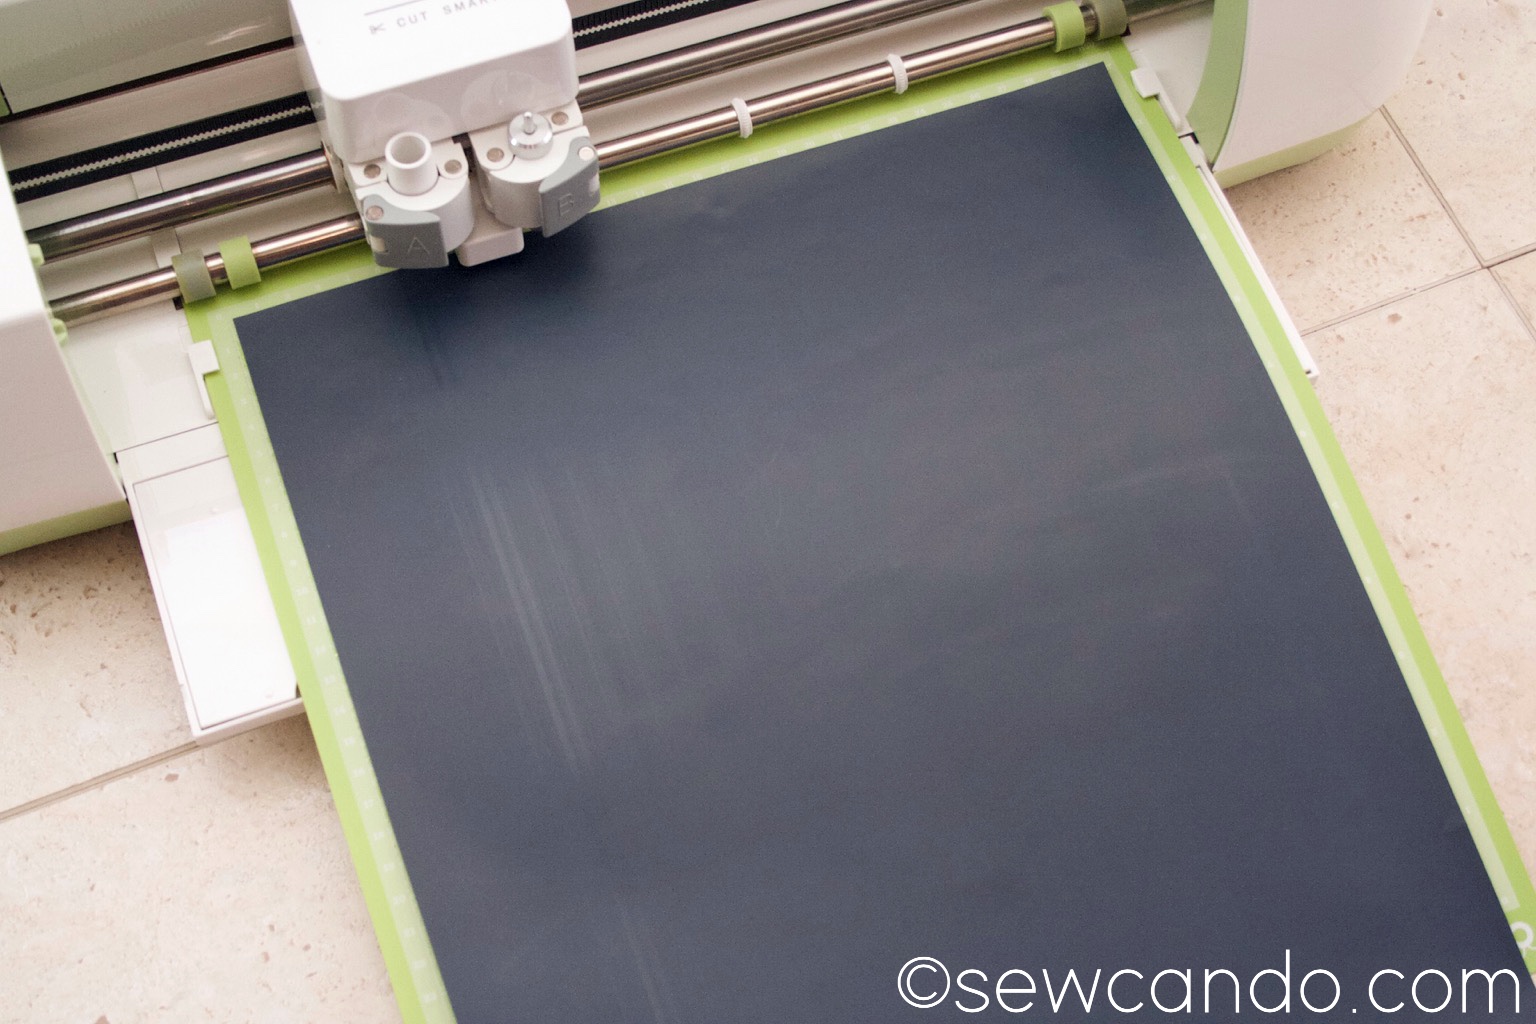 Sew Can Do: HTVRONT Chameleon Heat Transfer Vinyl Review & Giveaway